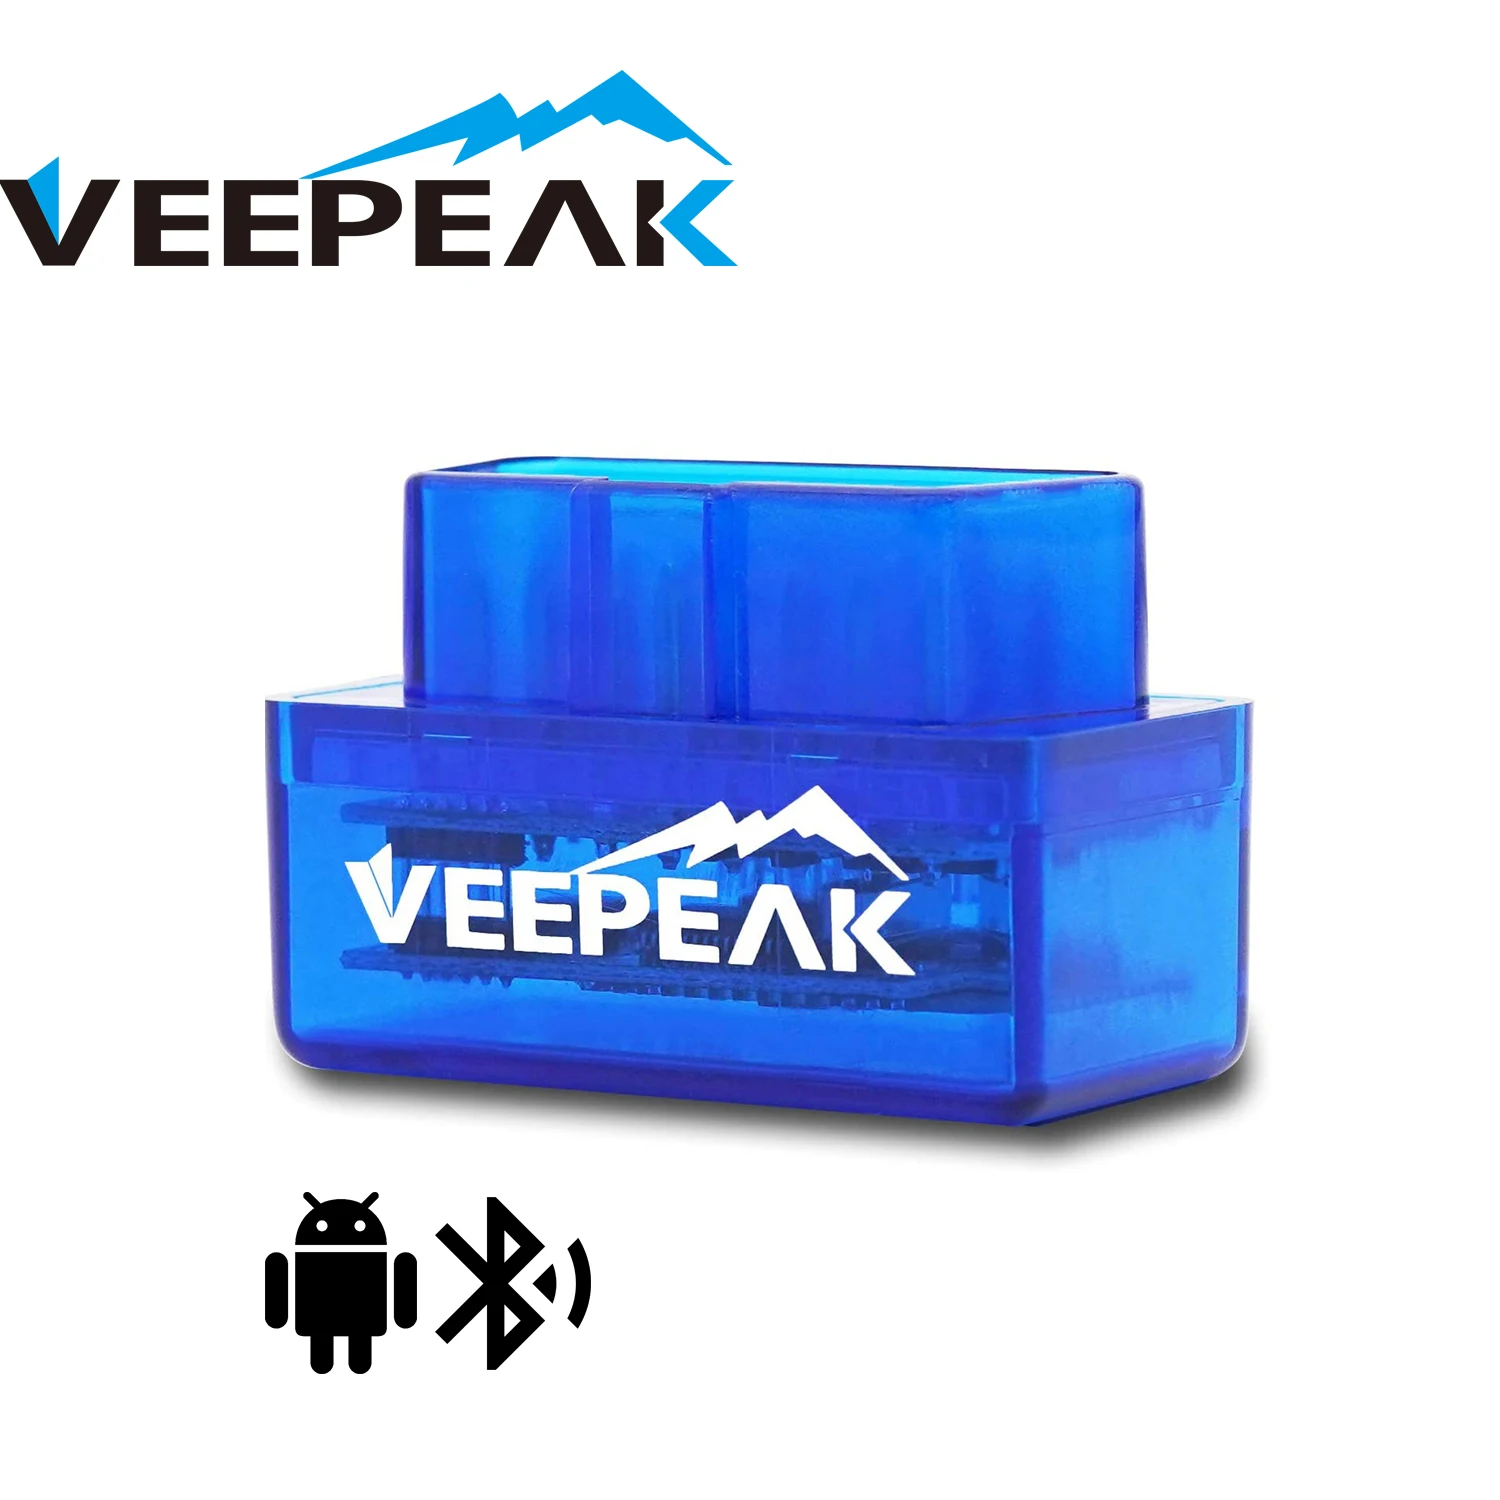 Veepeak Mini Bluetooth OBD2 Scanner for Android, Car OBD II Diagnostic Scan Tool Check Engine Light Code Reader, Supports Torque veepeak obdcheck ble obd2 bluetooth scanner auto obd ii diagnostic scan tool for ios